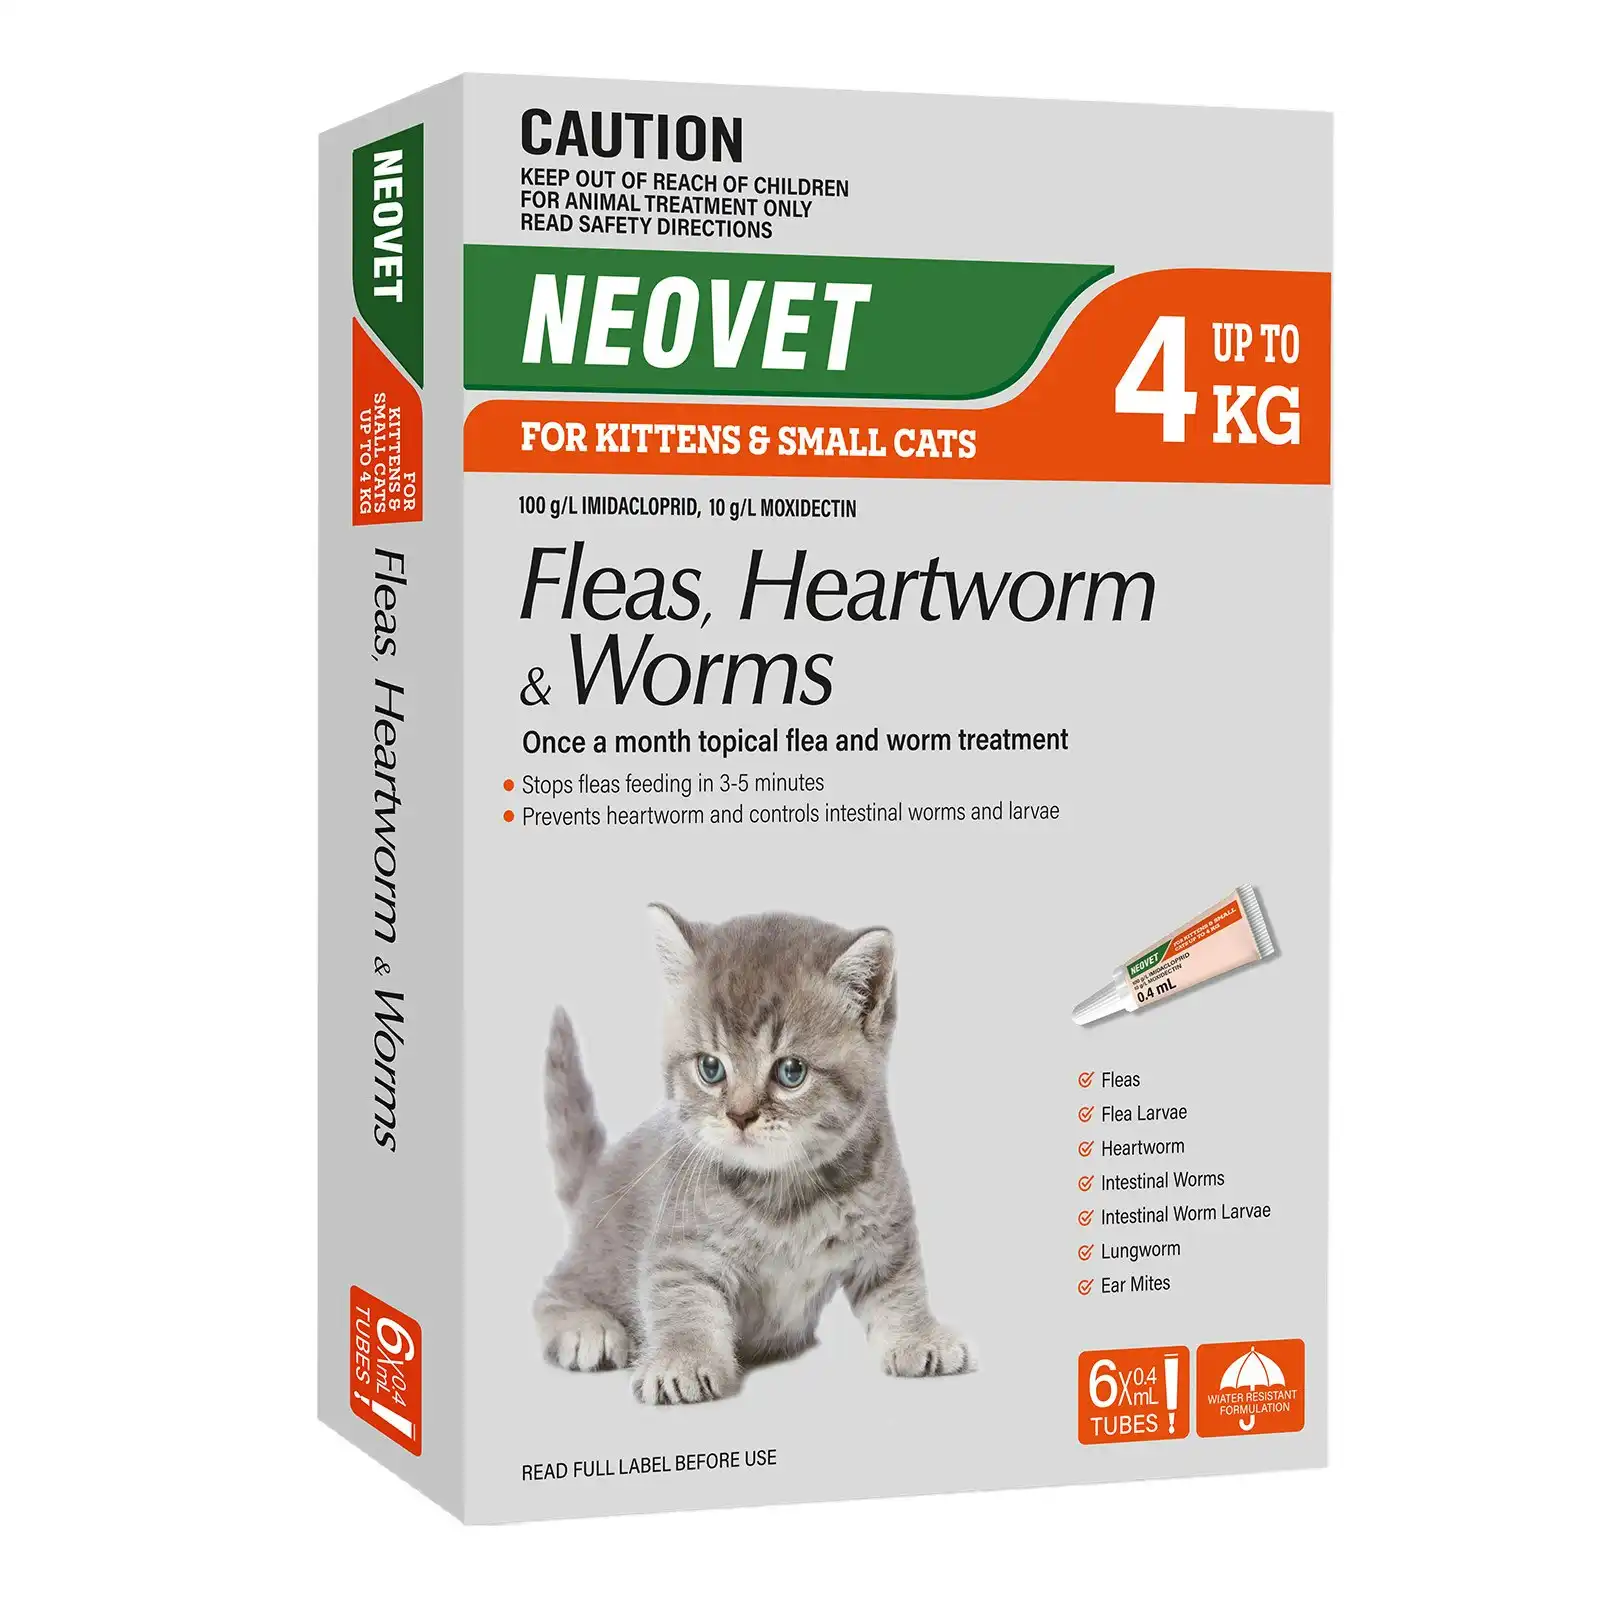 Neovet for Kittens and Small Cats Up To 4 Kg (ORANGE) 6 Pack